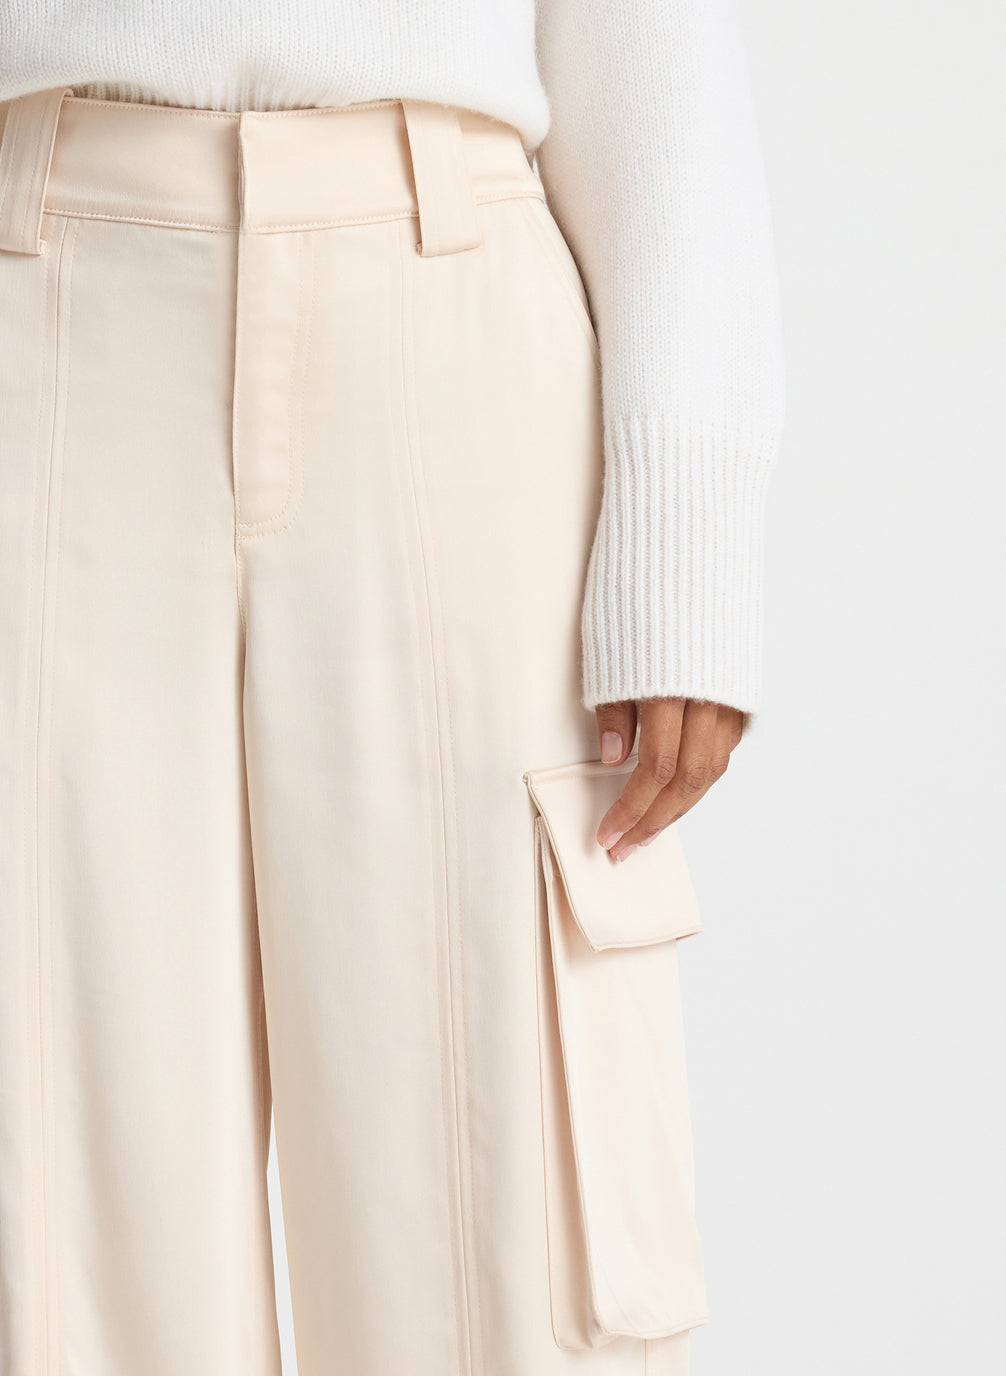 detail view of woman wearing white sweater and beige satin cargo pants